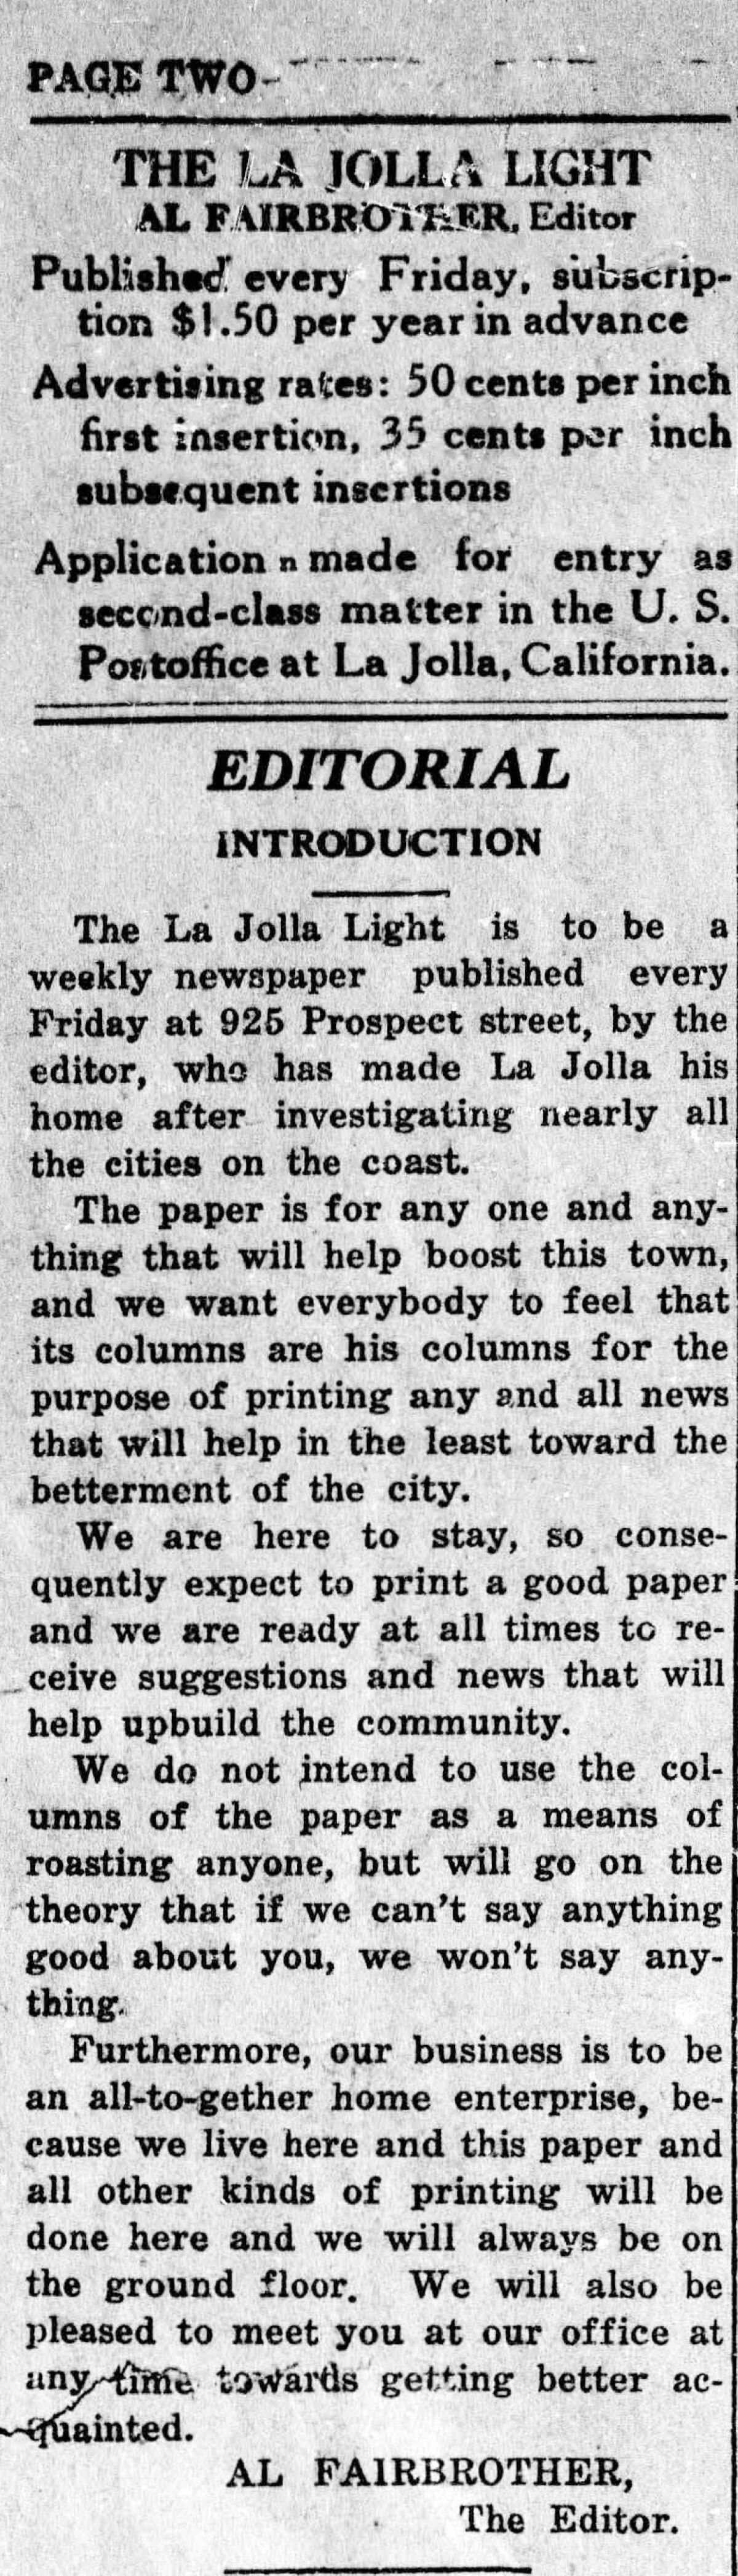 Editorial by Al Fairbrother published April 7, 1922 on page two of the first edition of the La Jolla Light.